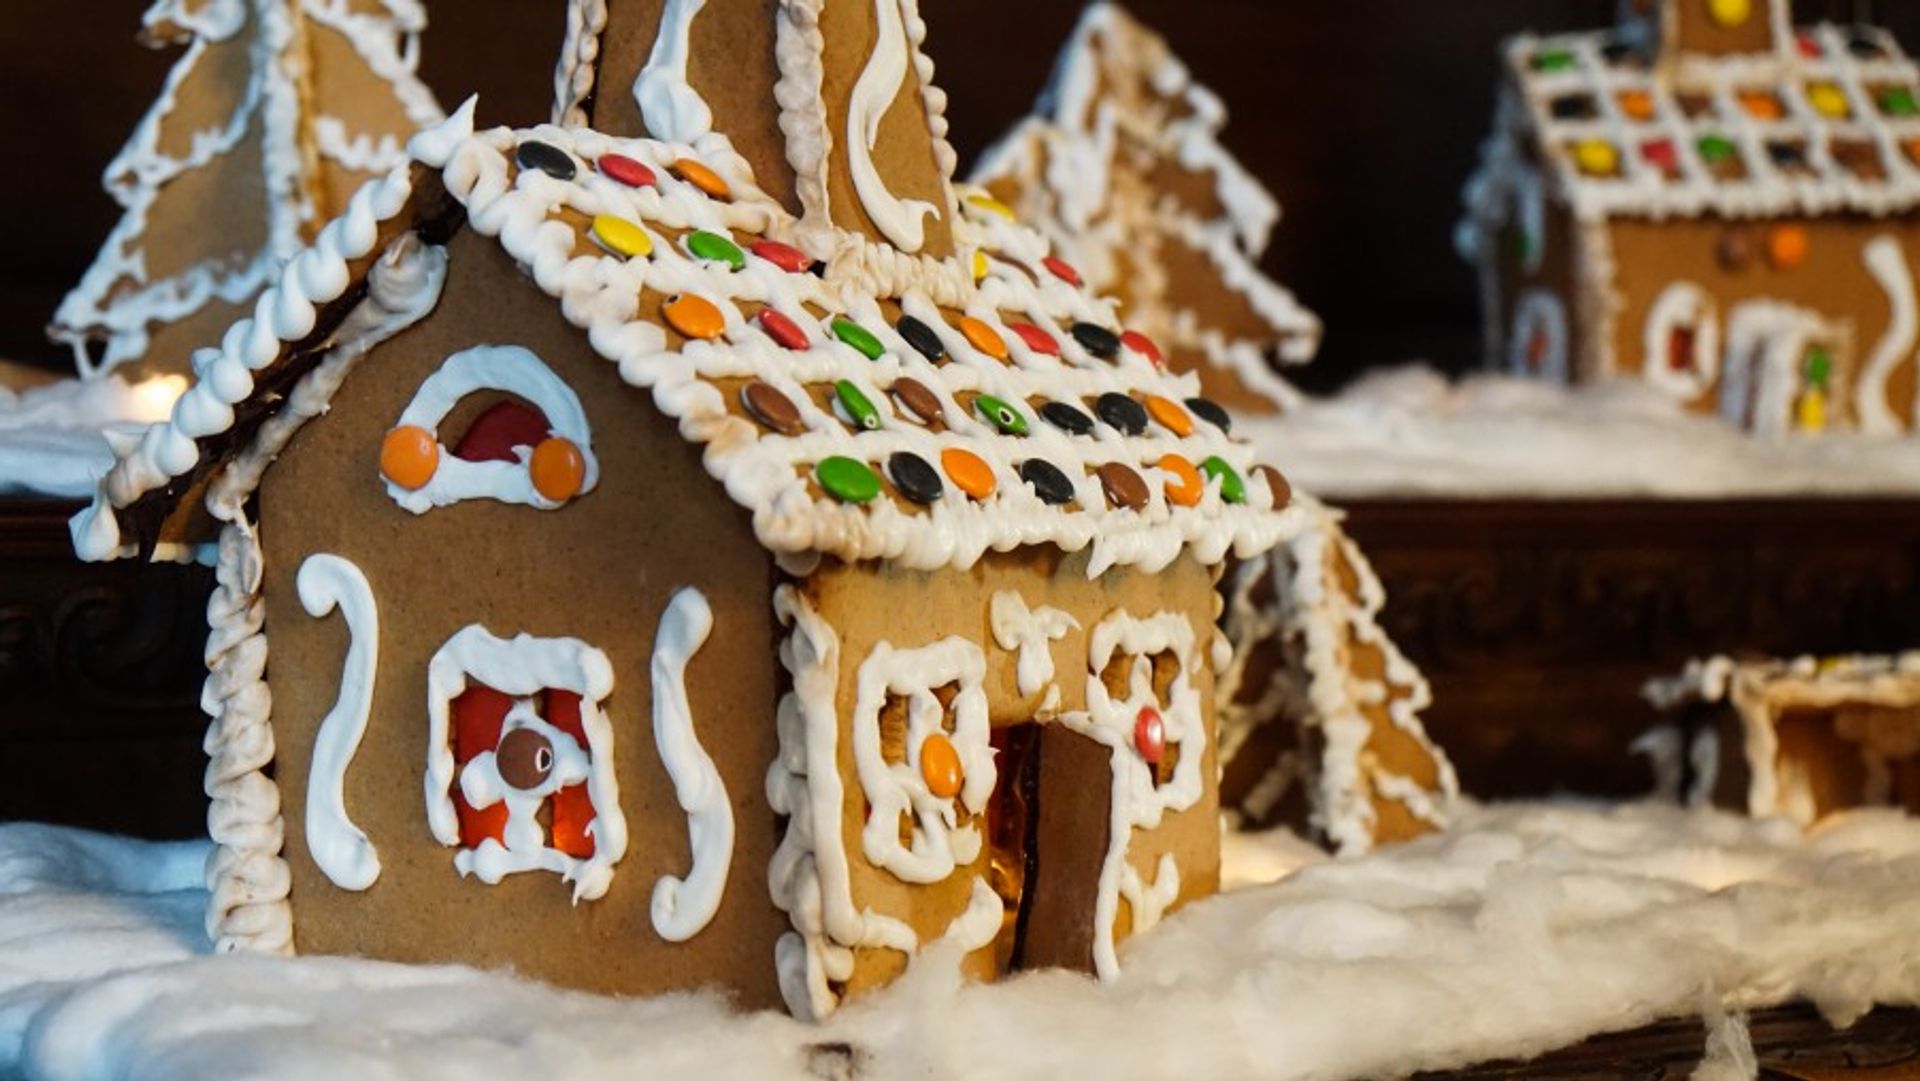 Gingerbread houses in the castle's dining hall where you can fika